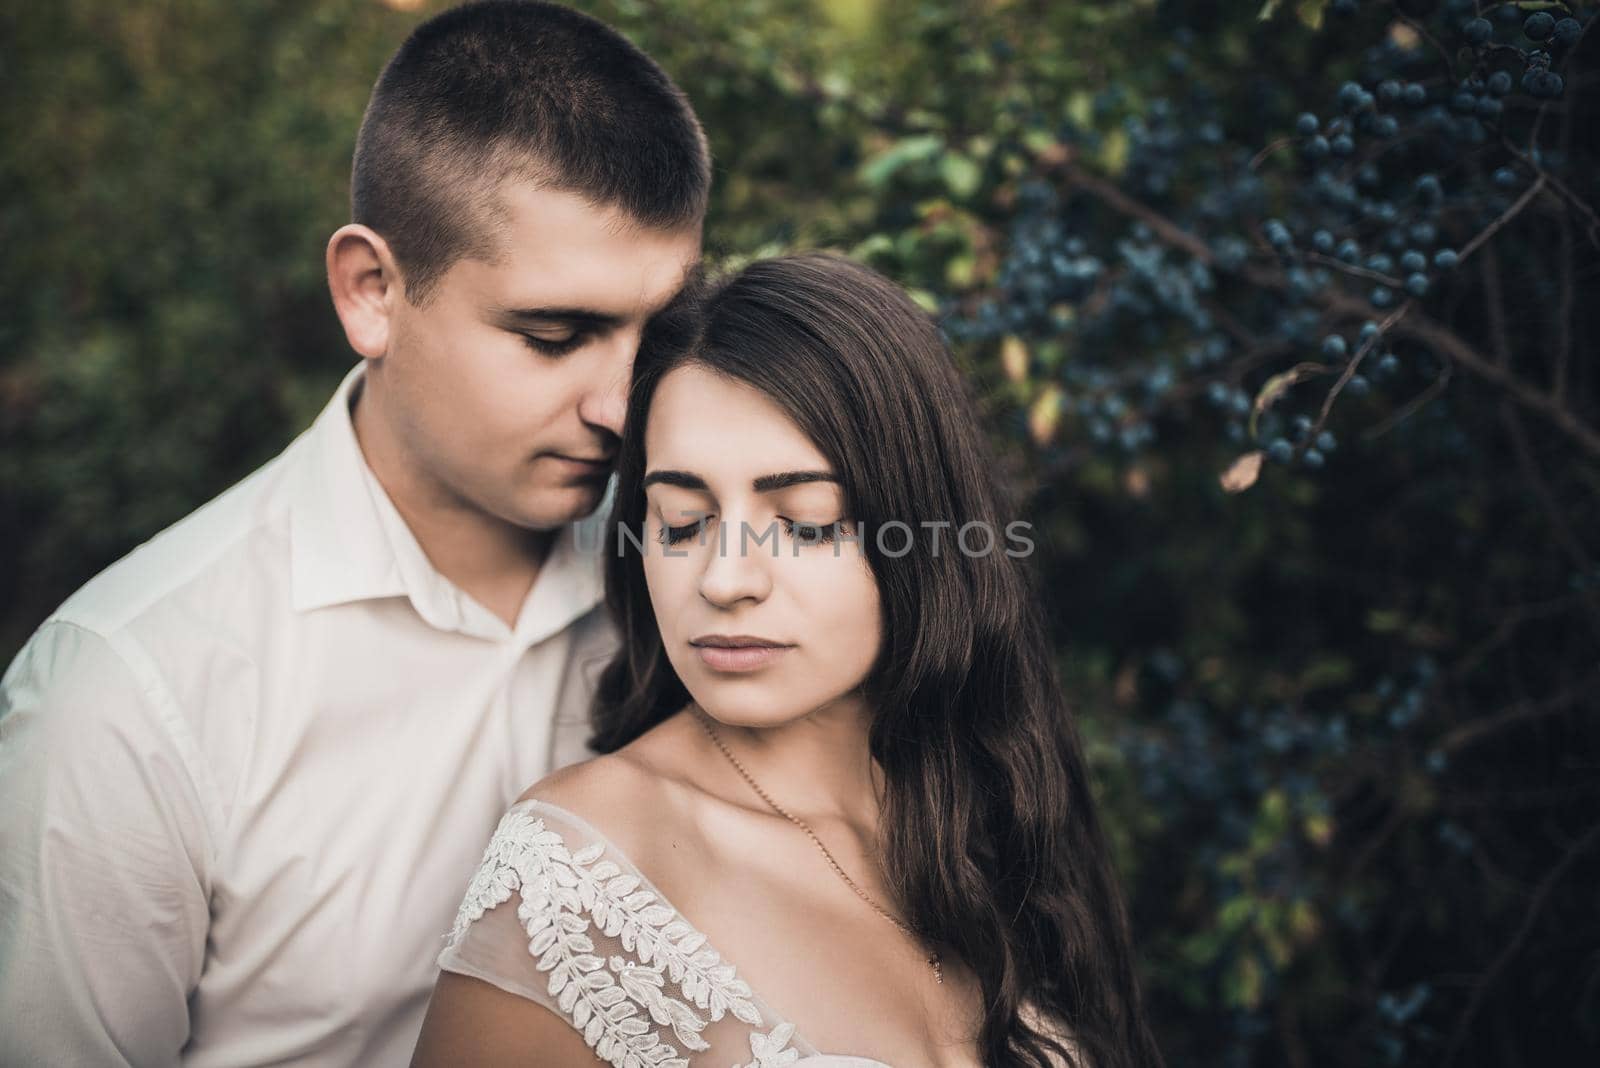 bride and groom in wedding dress on background of green bush with blurred blue berries. by AndriiDrachuk